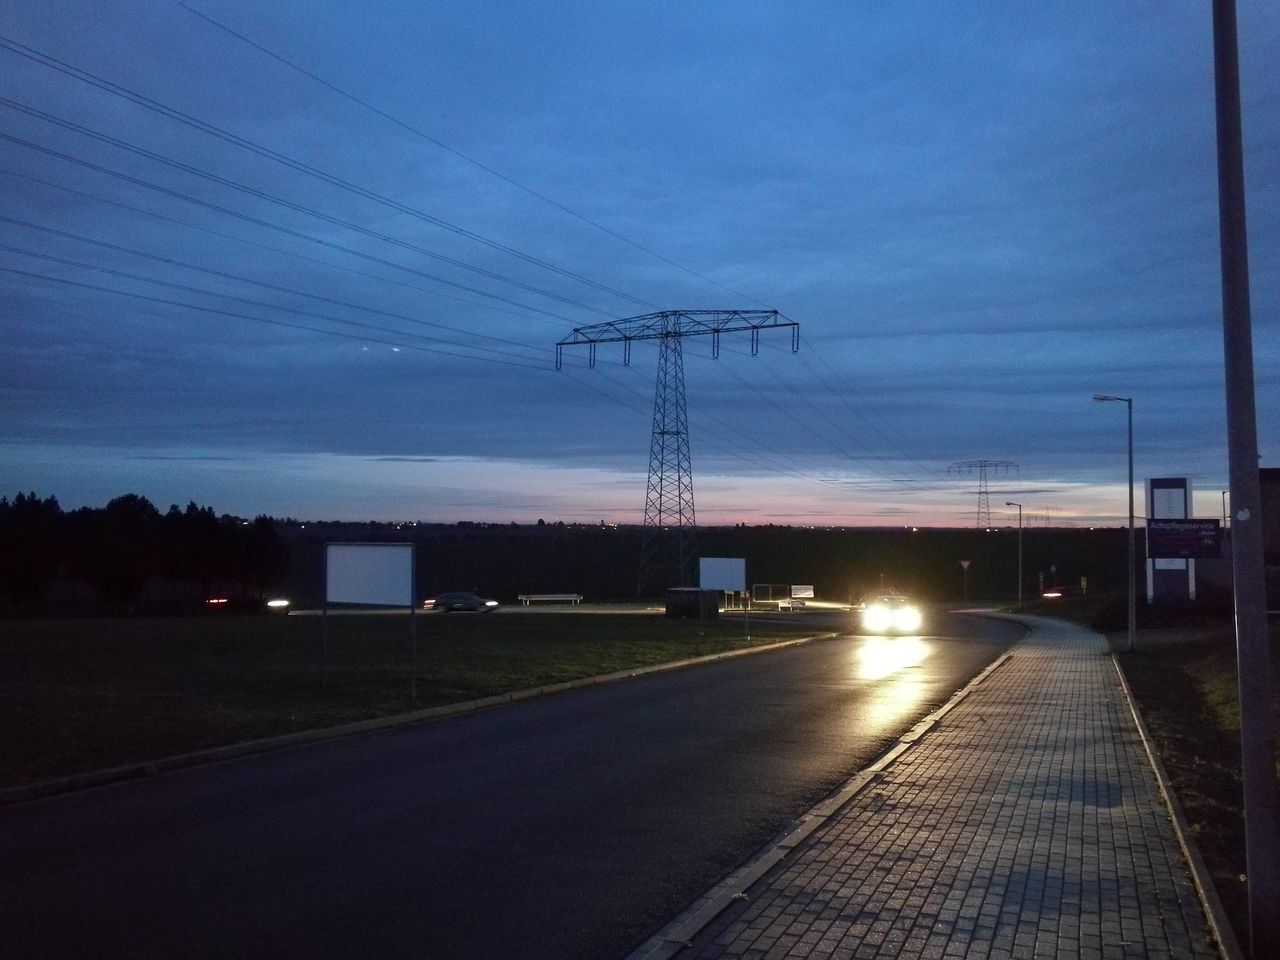 ROAD AGAINST SKY AT NIGHT